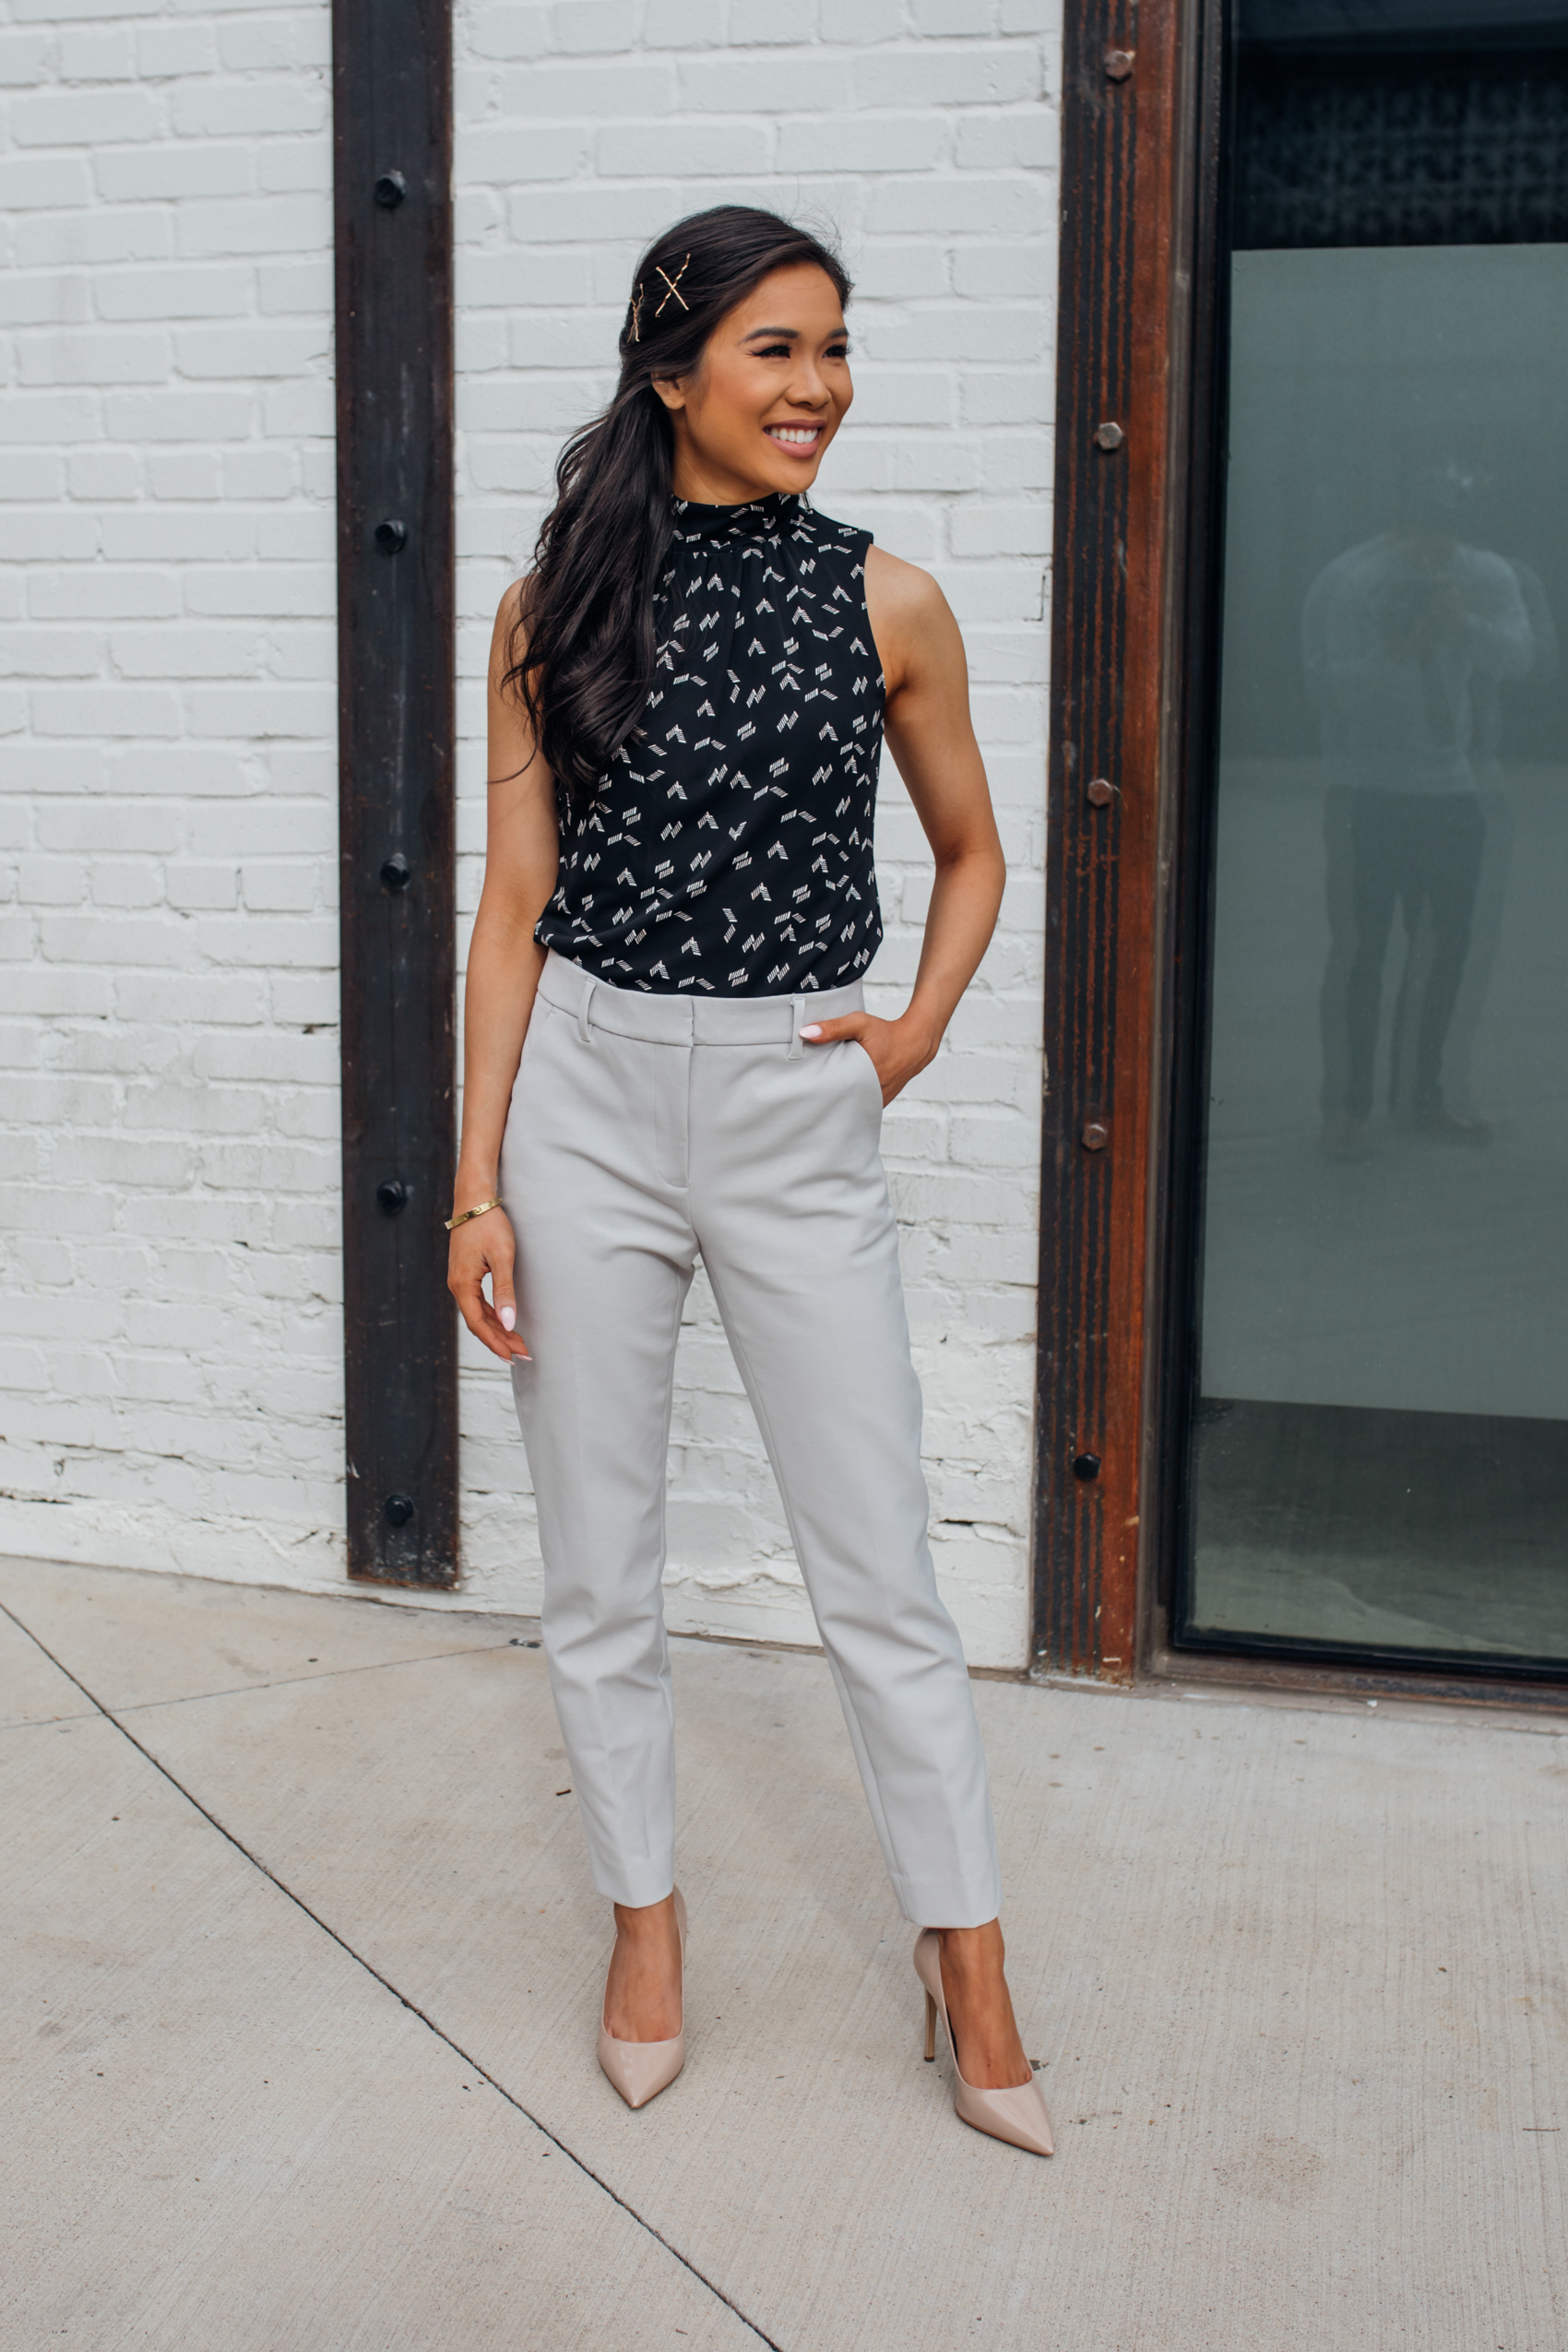 Blogger Hoang-Kim wears light gray comfort stretch slim pants in light gray, chevron mock neck shell and M.Gemi nude heels with a half-up half down hairstyle for spring workwear